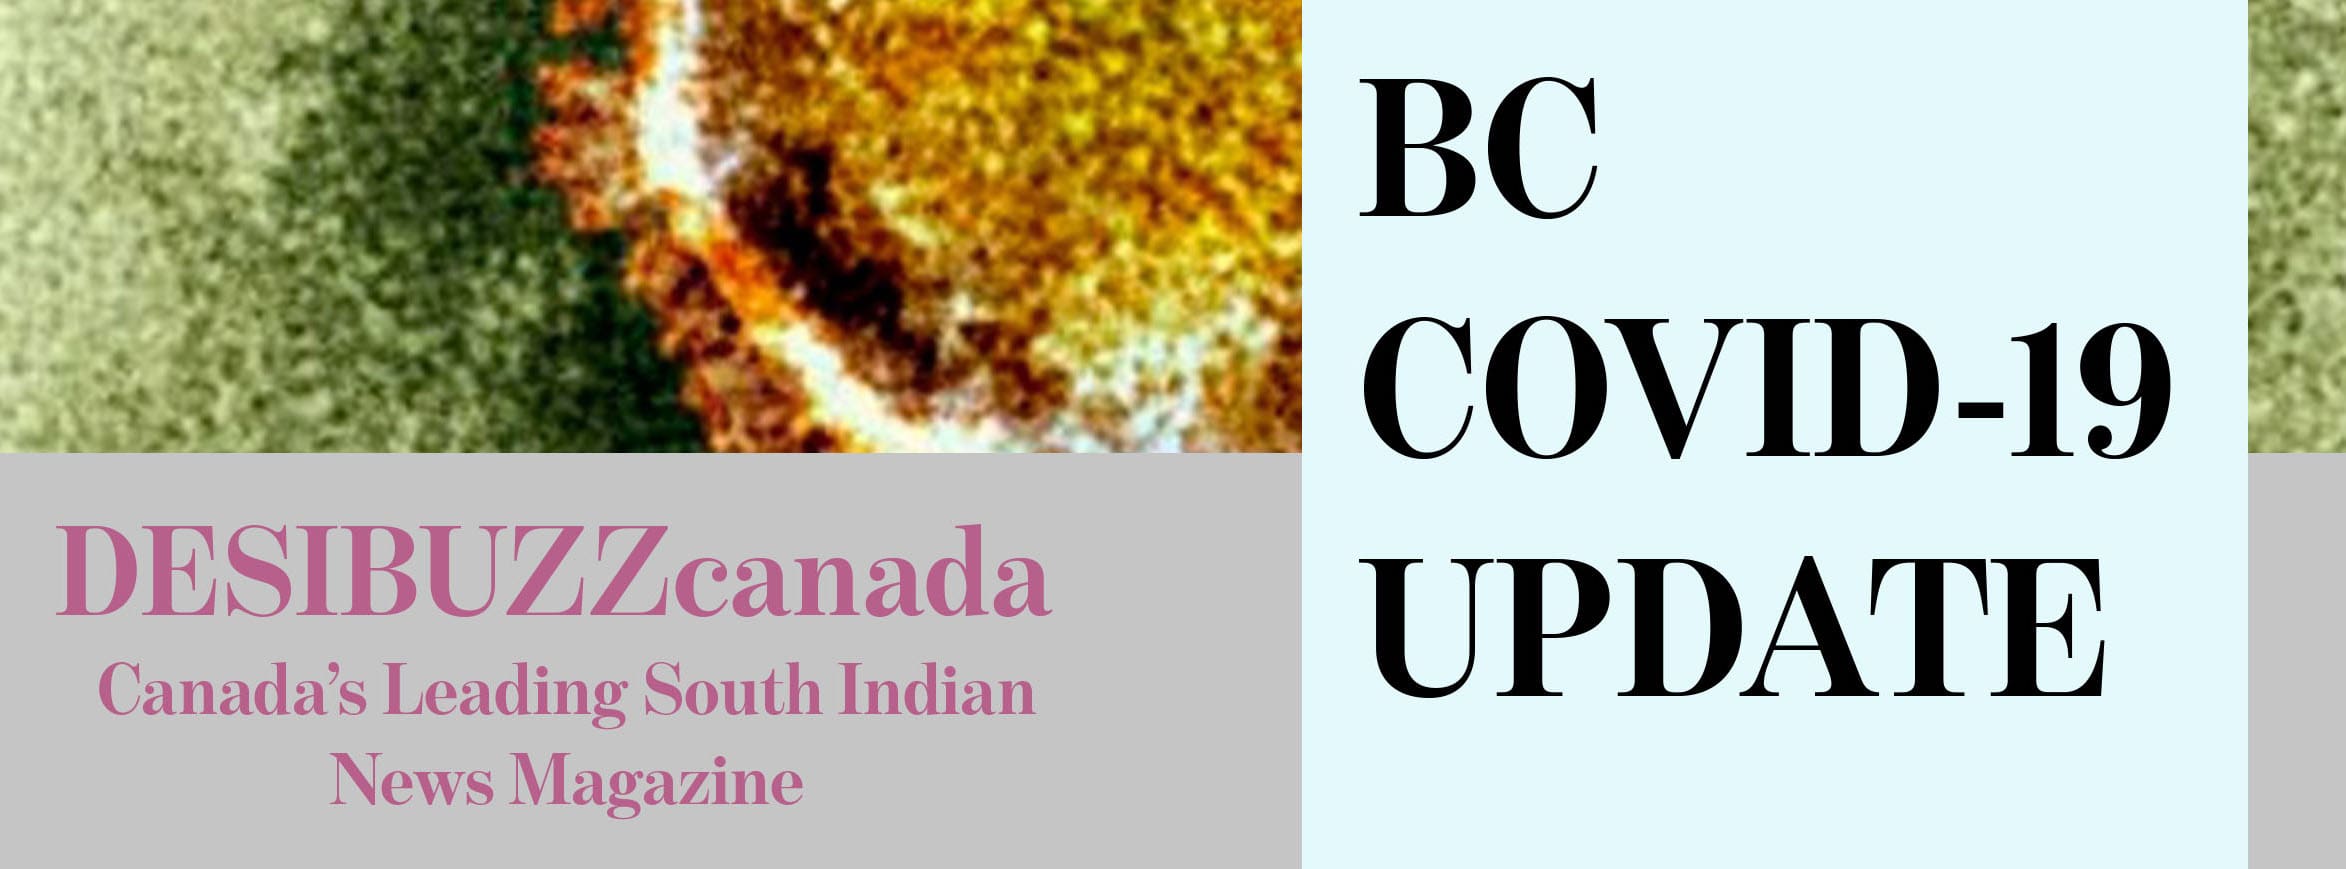 BC COVID-19 DAILY UPDATE: Cases Dip Below 500 On Friday With Two New Deaths